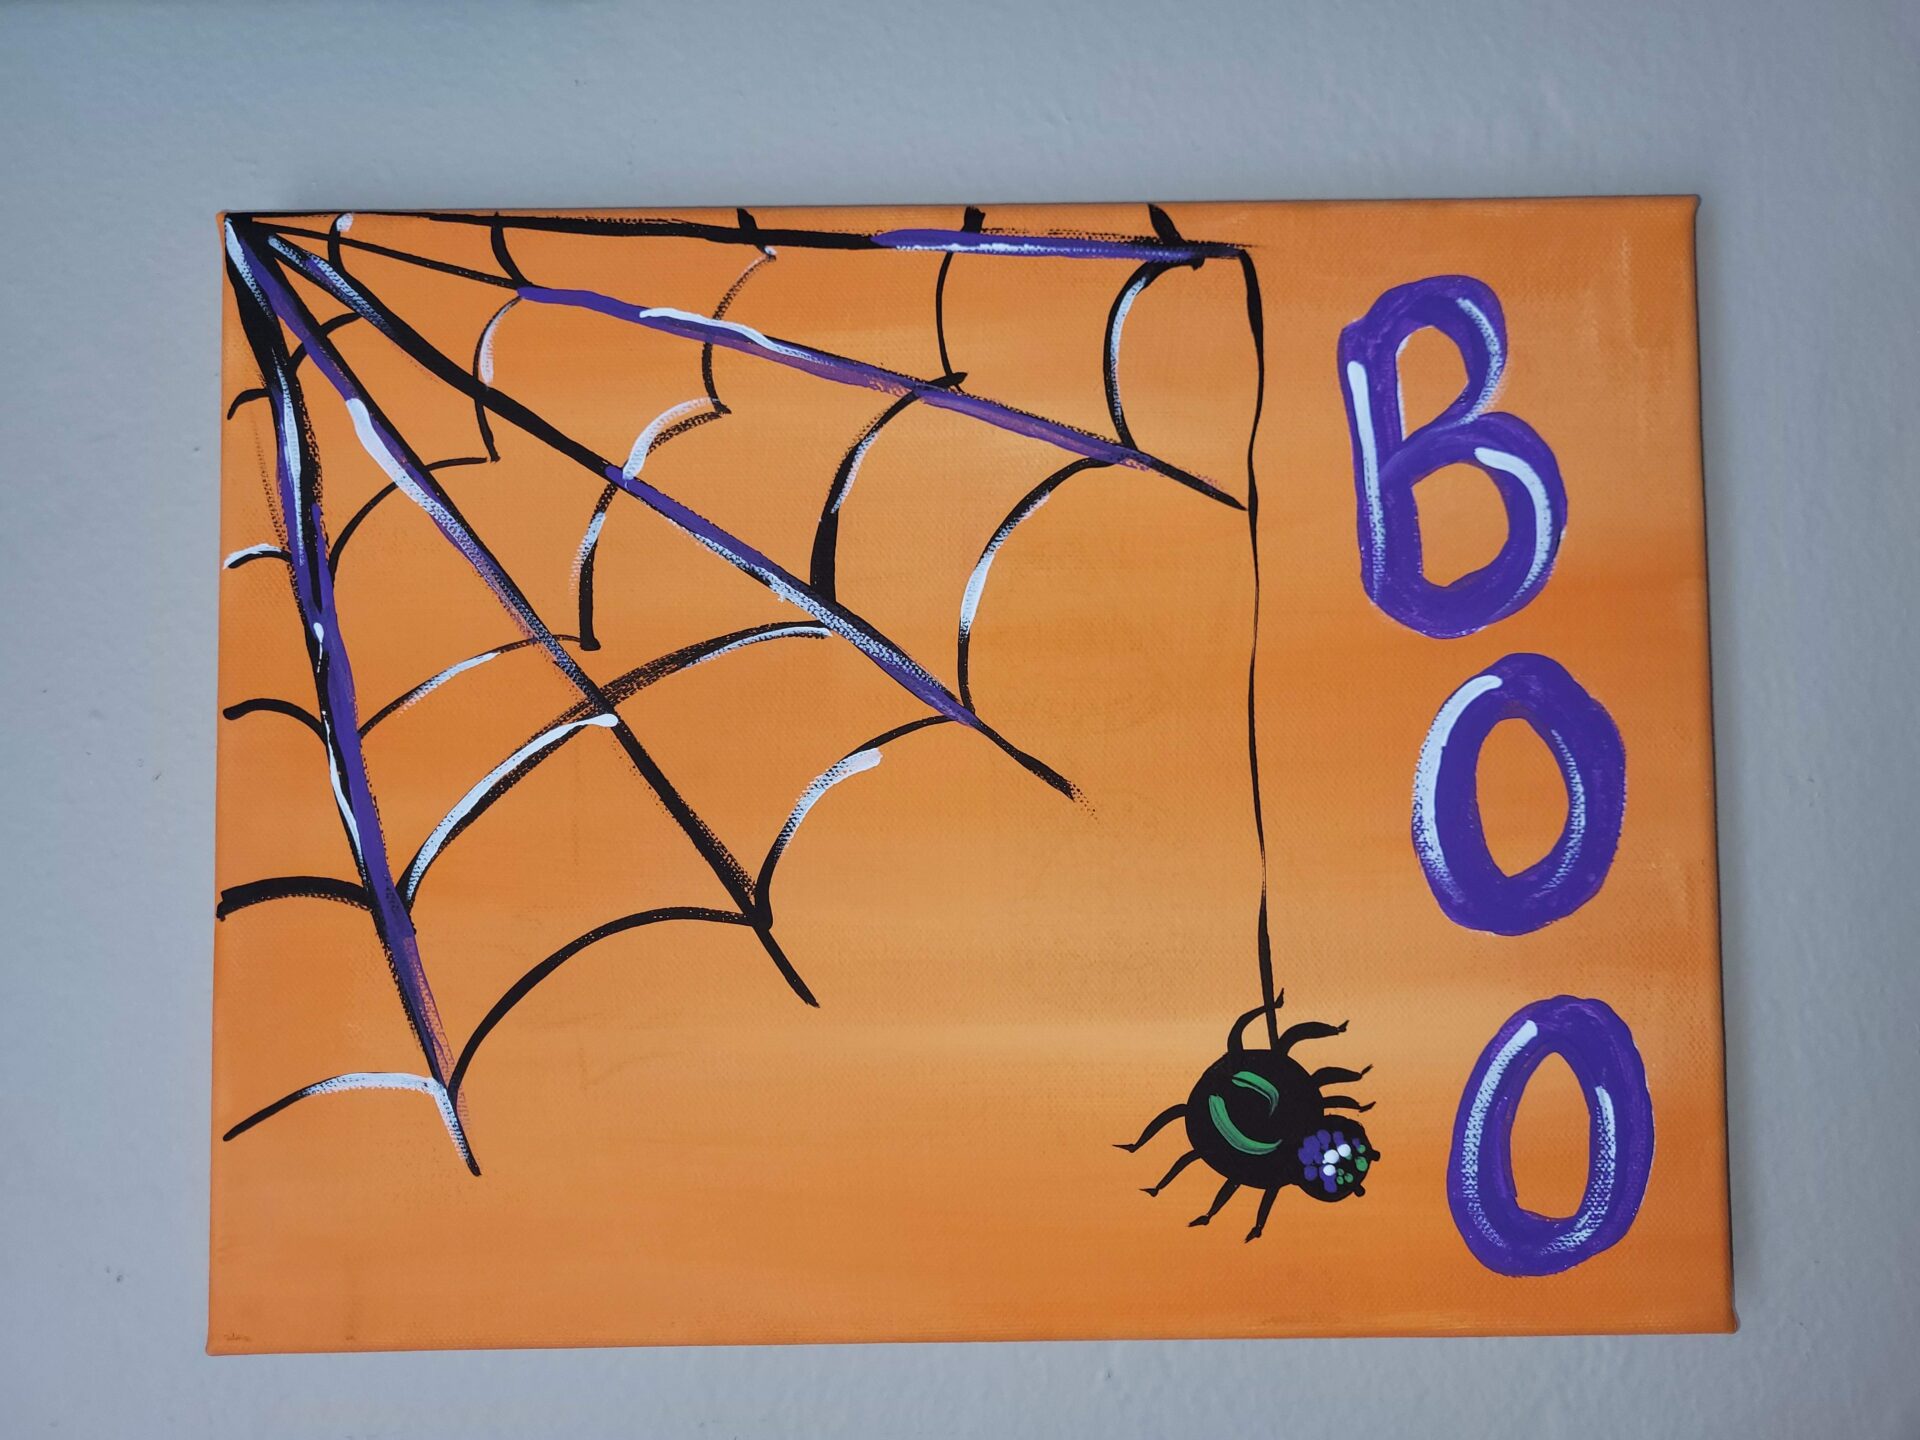 A Halloween Spider Painting on a Canvas Board